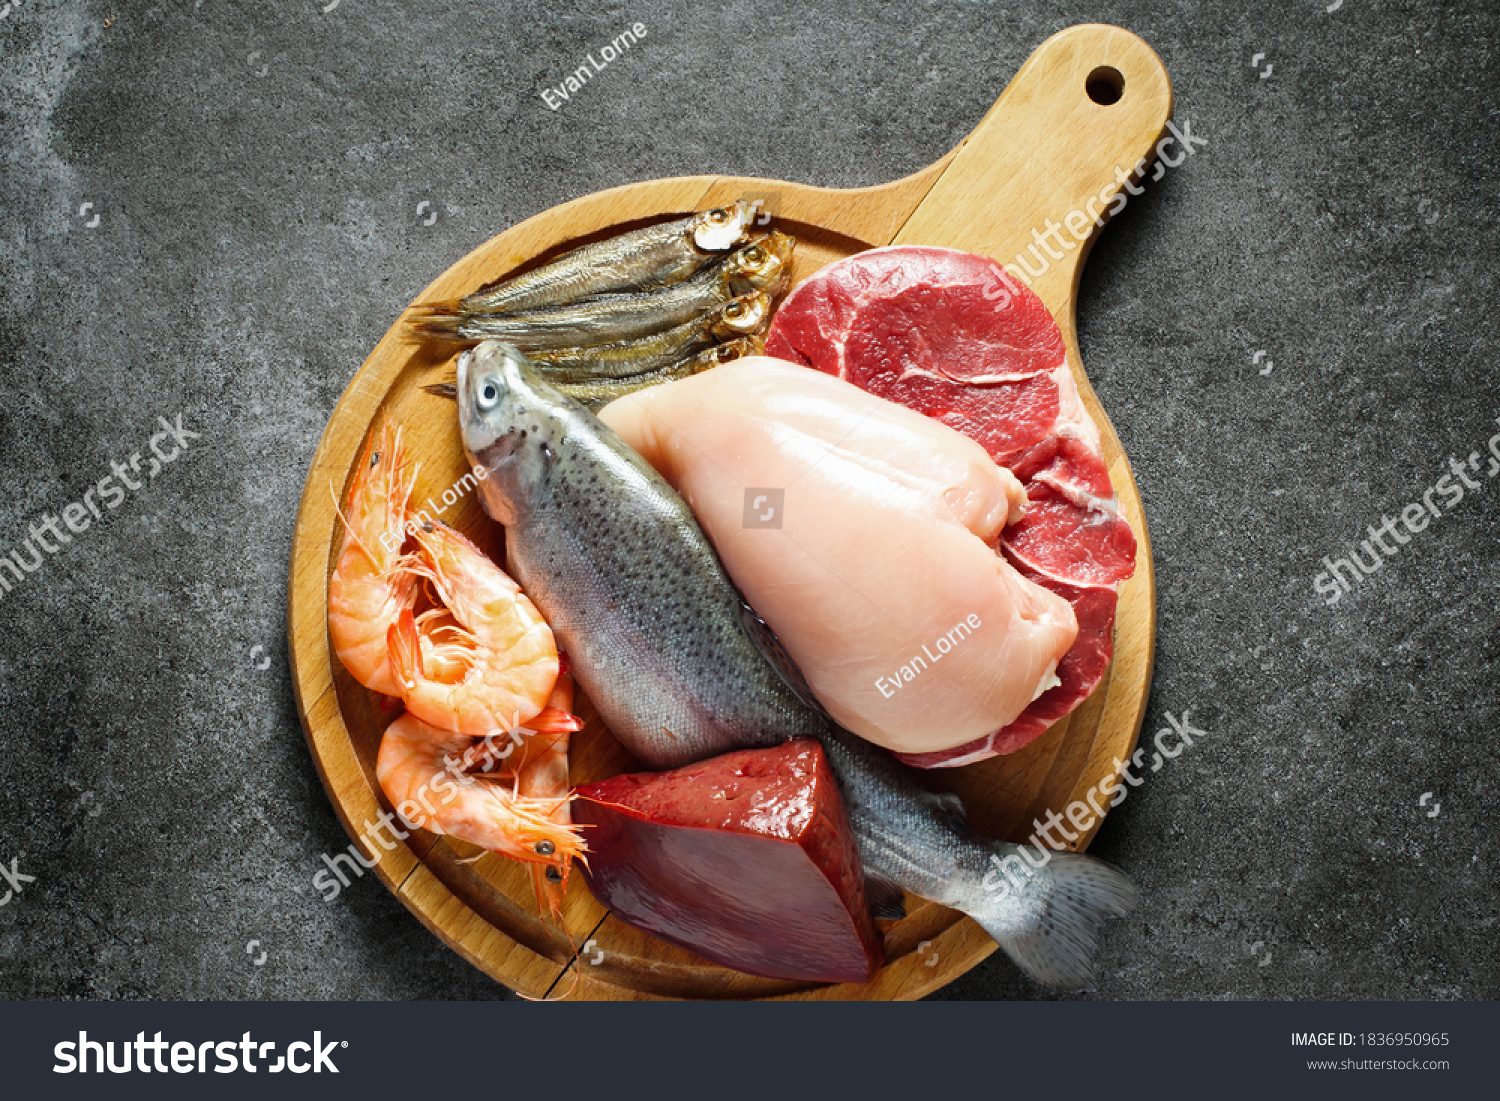 Animal protein sources - meat, fish, seafood #1836950965